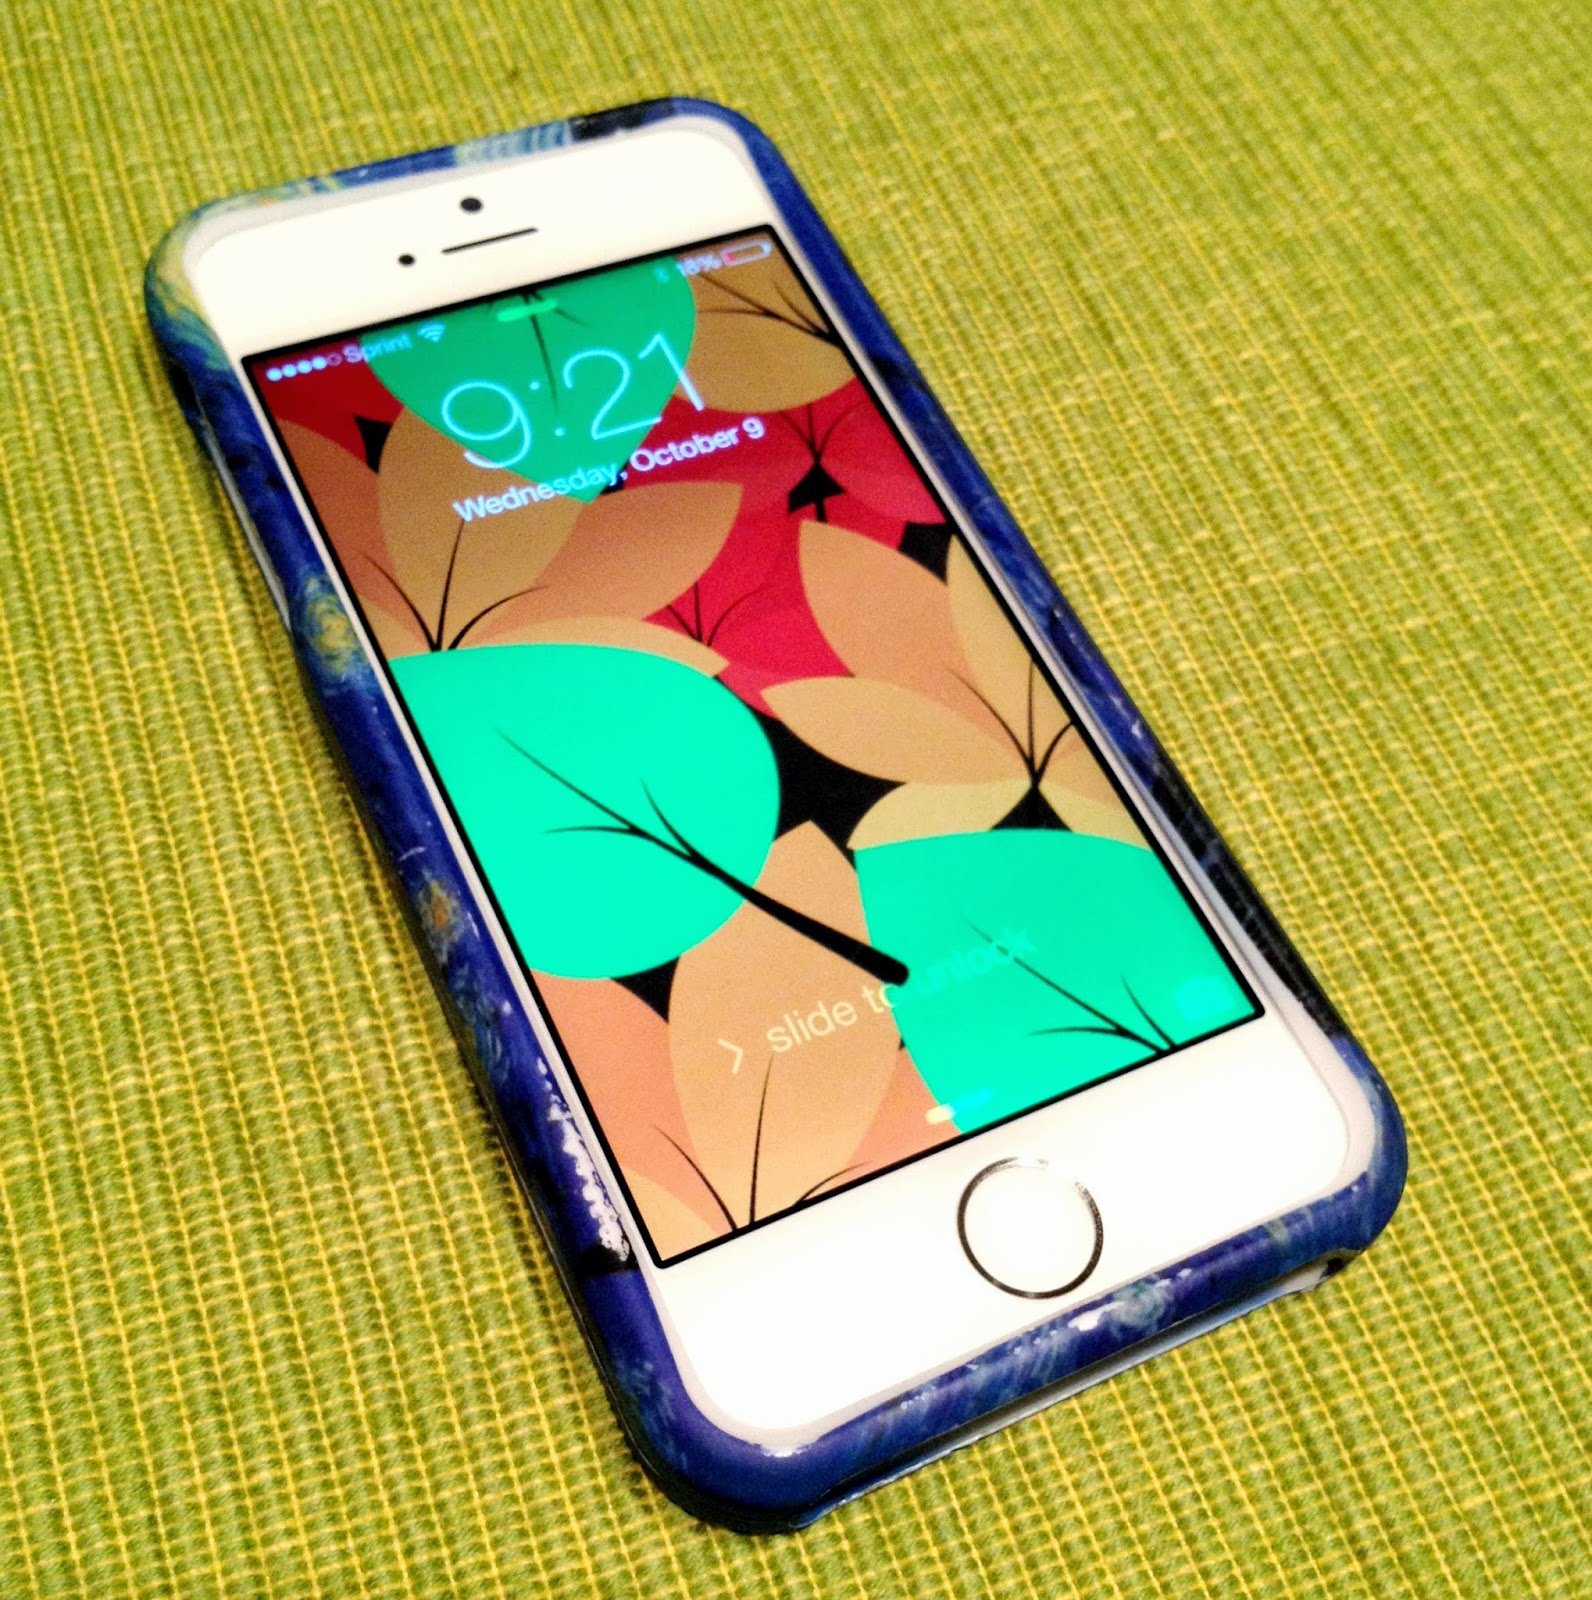 Want to make your own iPhone wallpaper You can open up a 1136 x 640 1592x1600